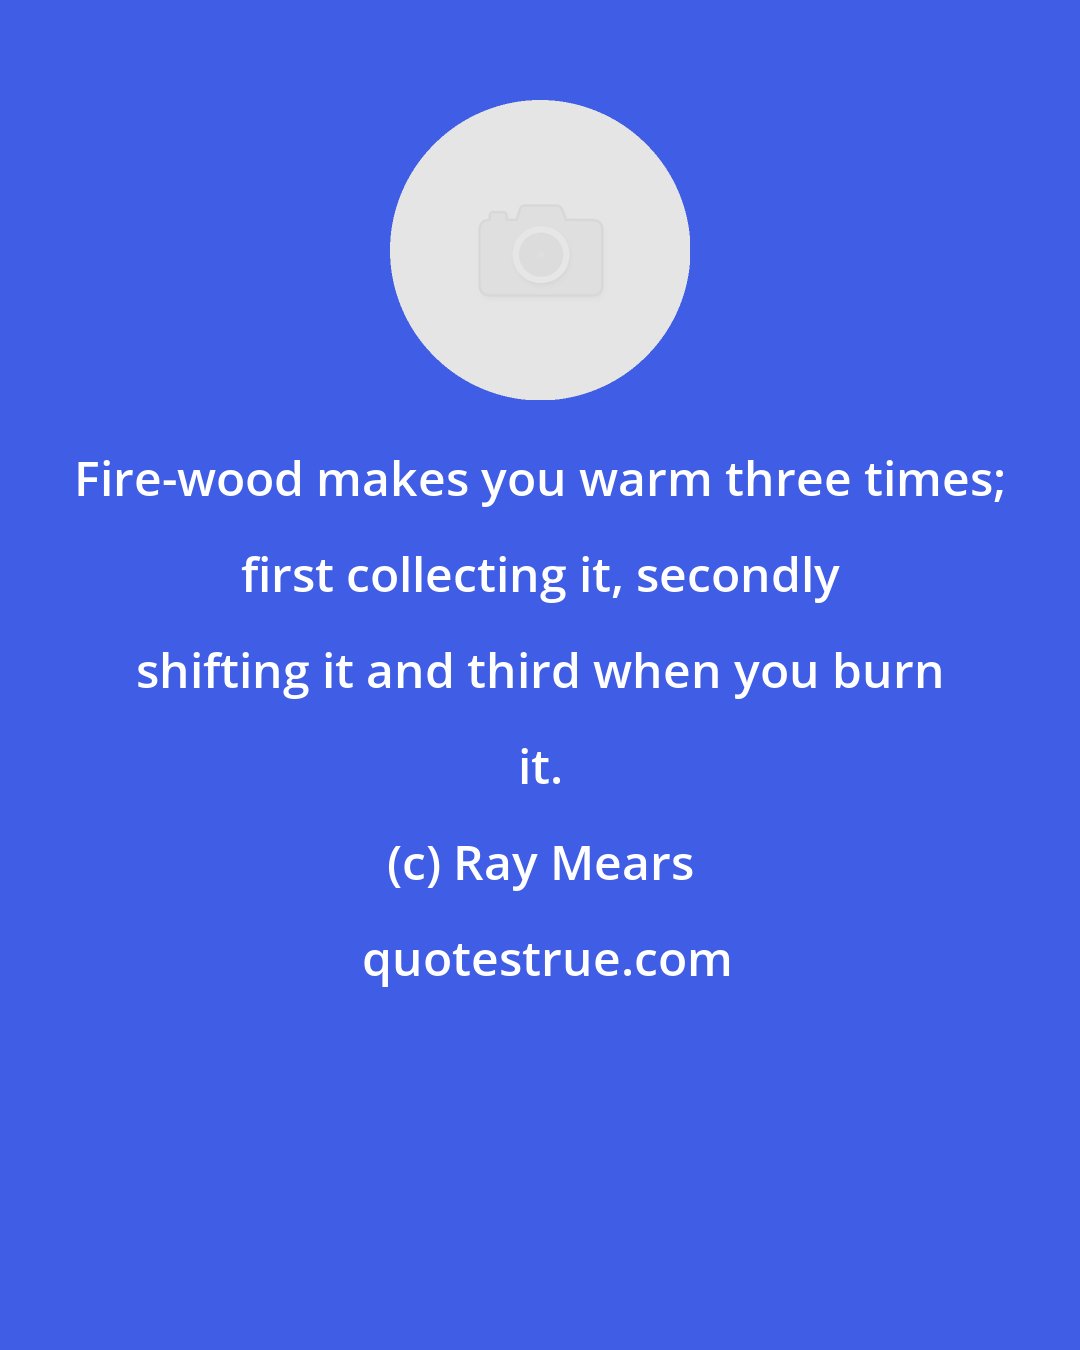 Ray Mears: Fire-wood makes you warm three times; first collecting it, secondly shifting it and third when you burn it.